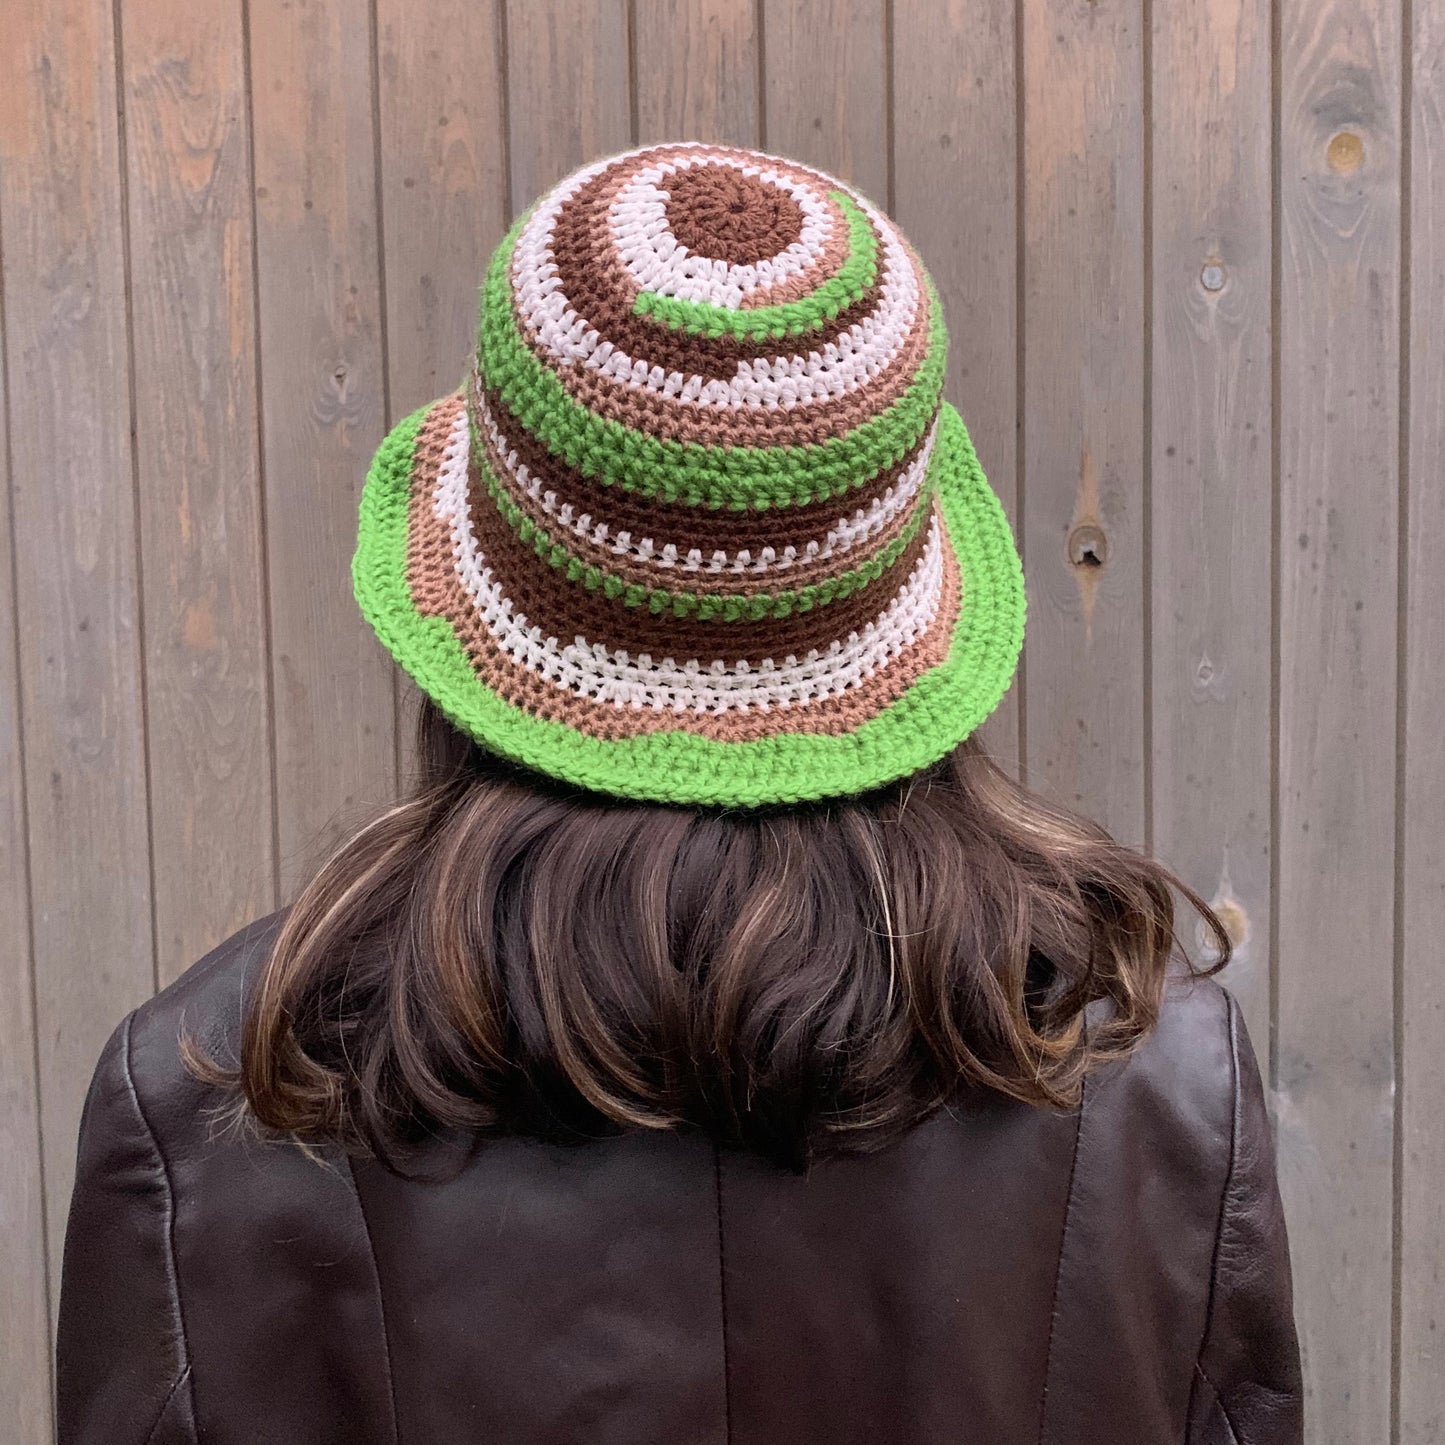 Handmade striped crochet bucket hat in green, brown and off white